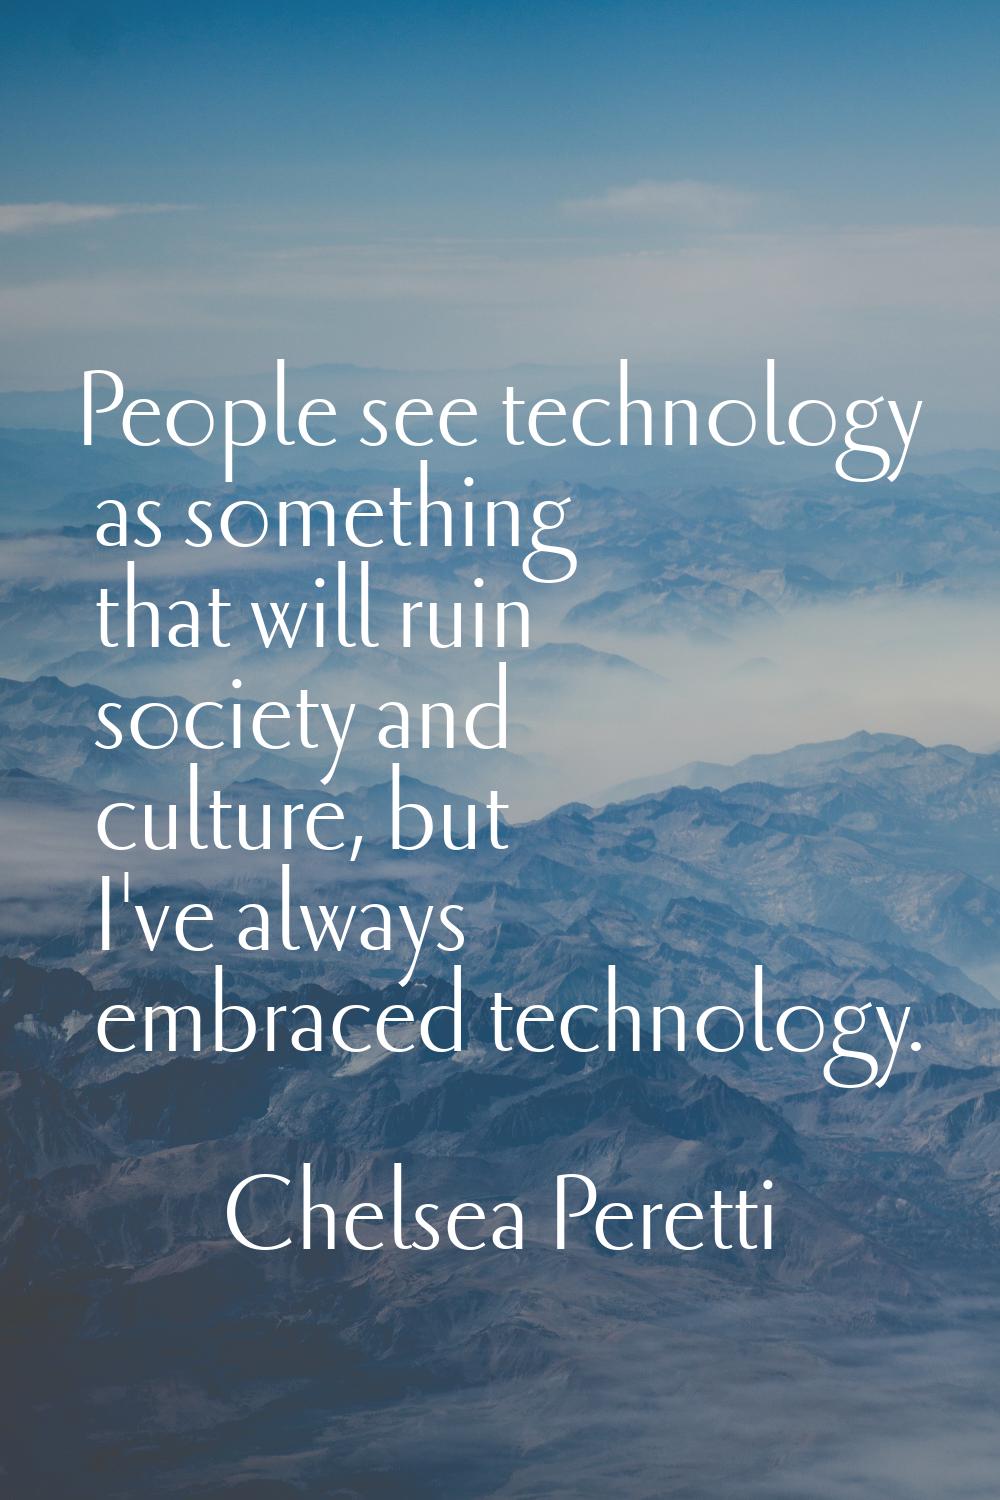 People see technology as something that will ruin society and culture, but I've always embraced tec